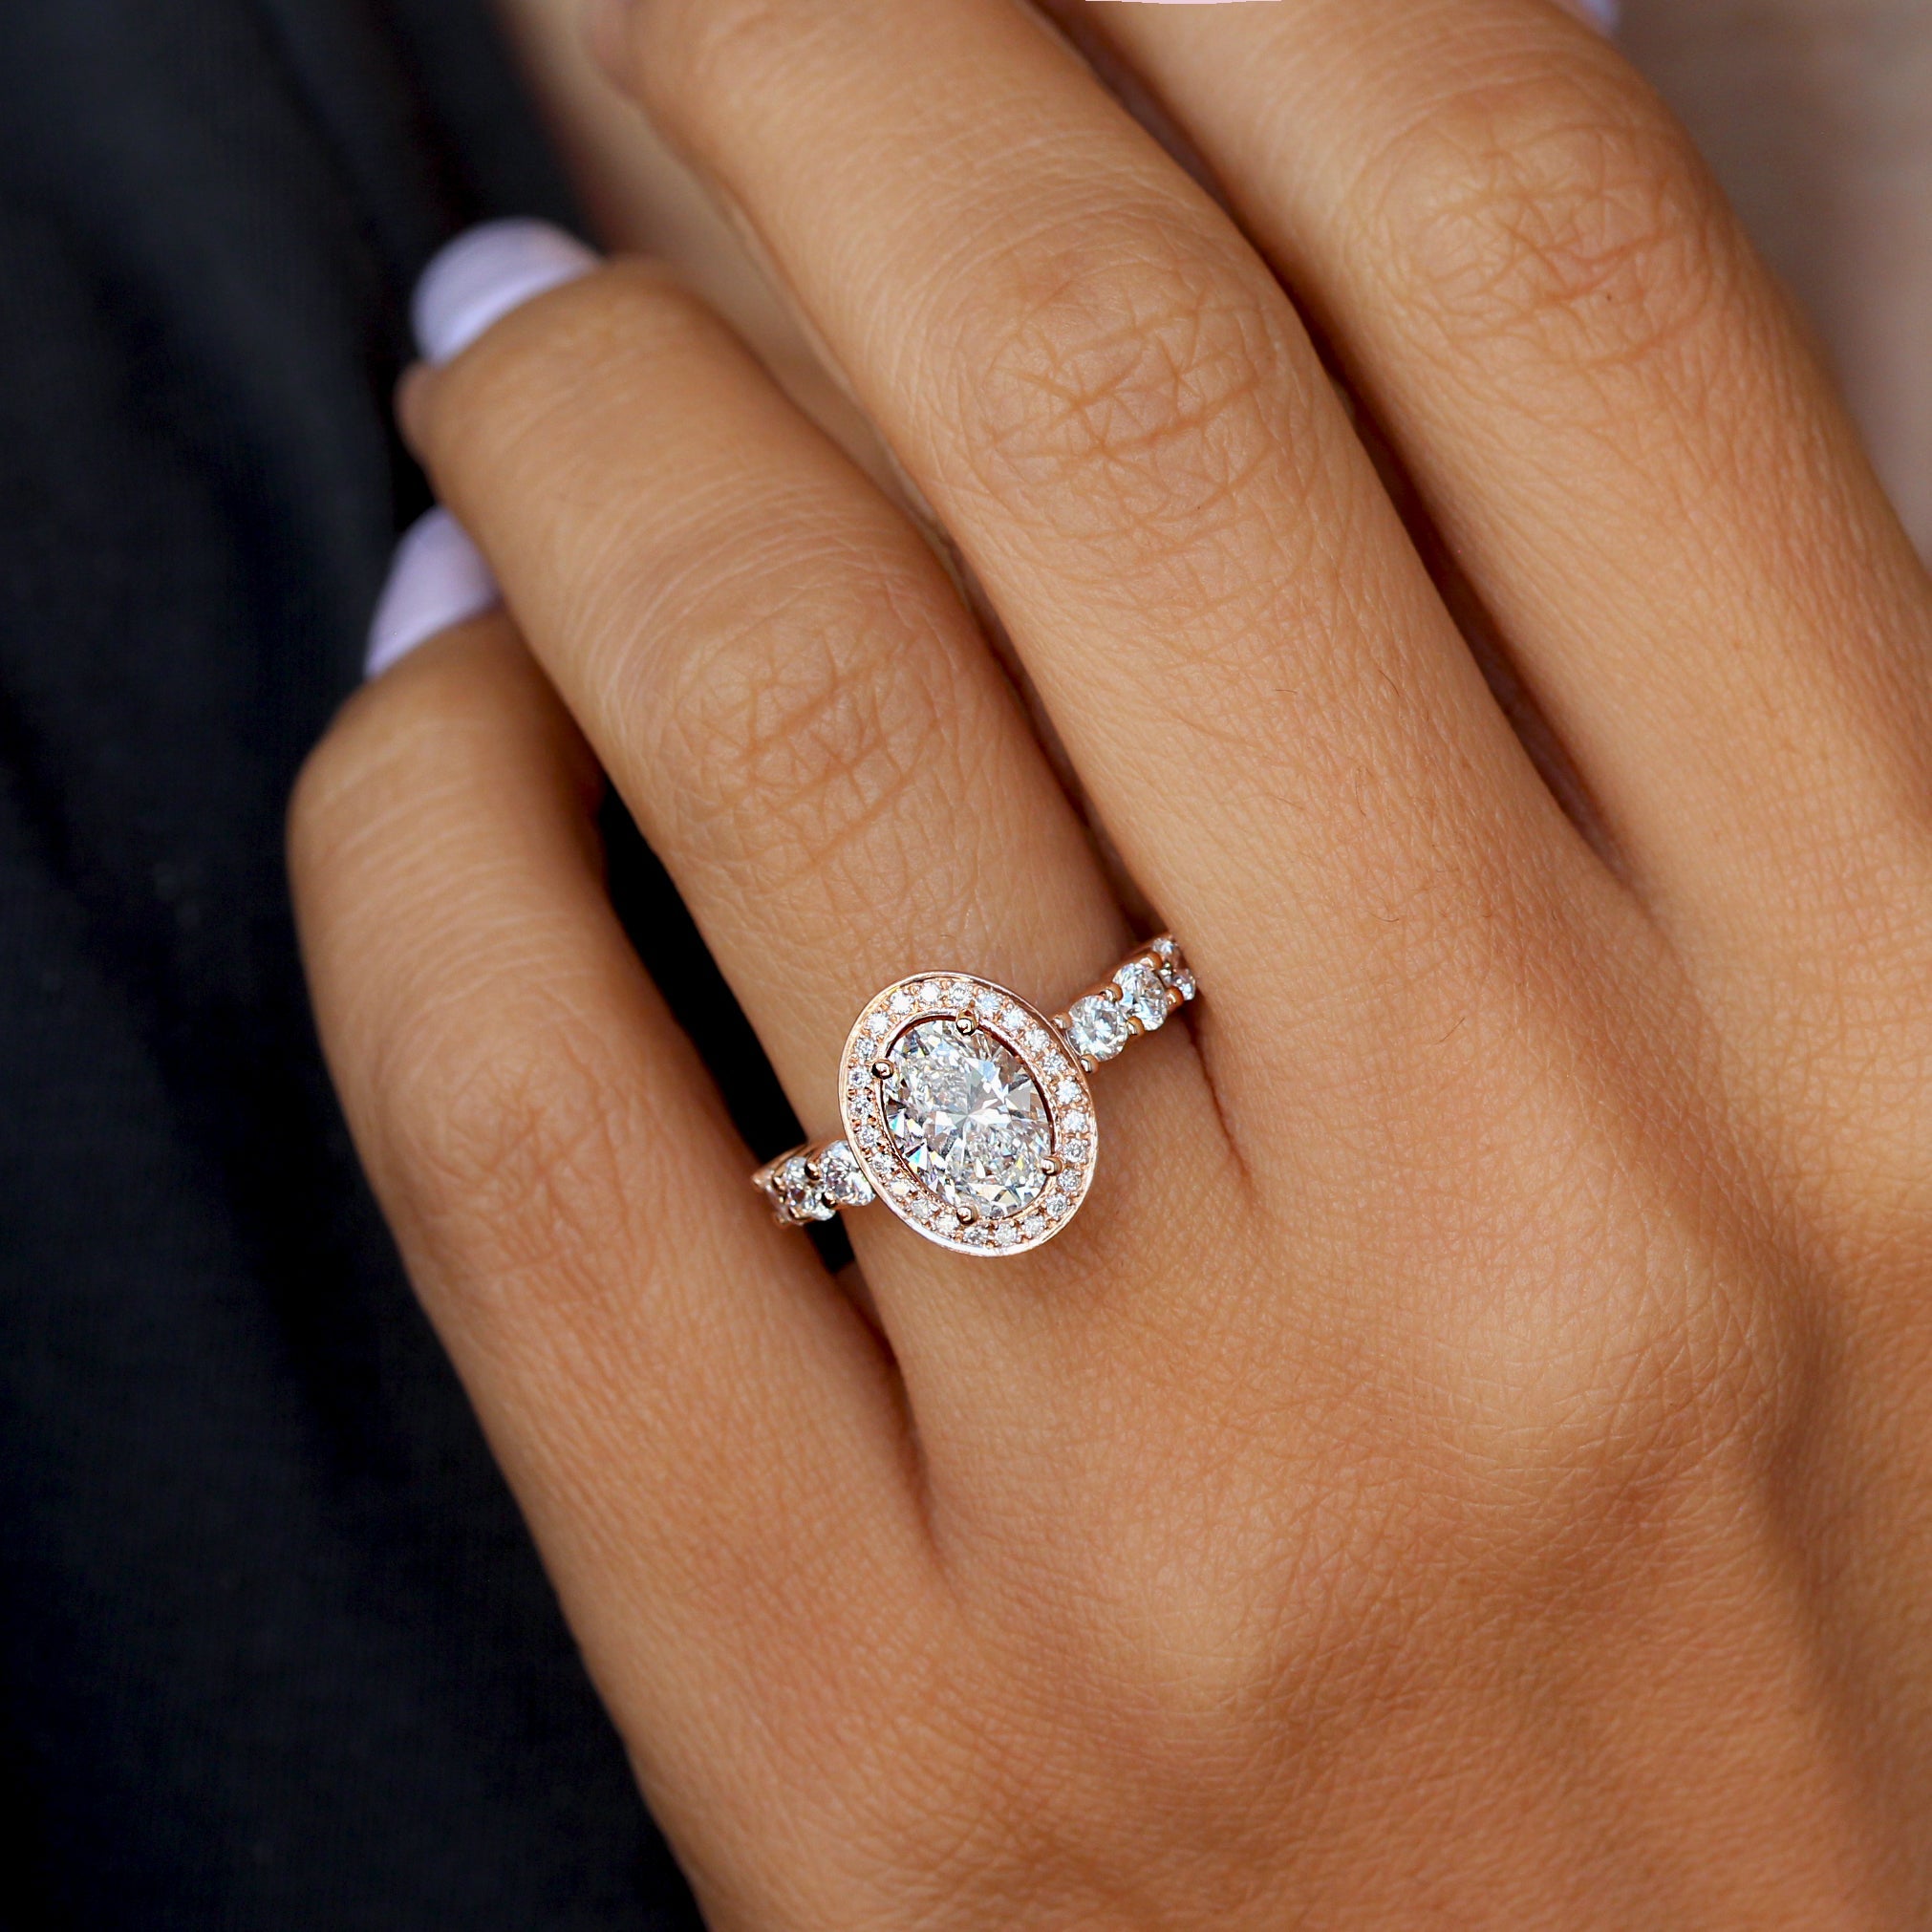 5 tips to choose the perfect halo engagement ring | Adiamor